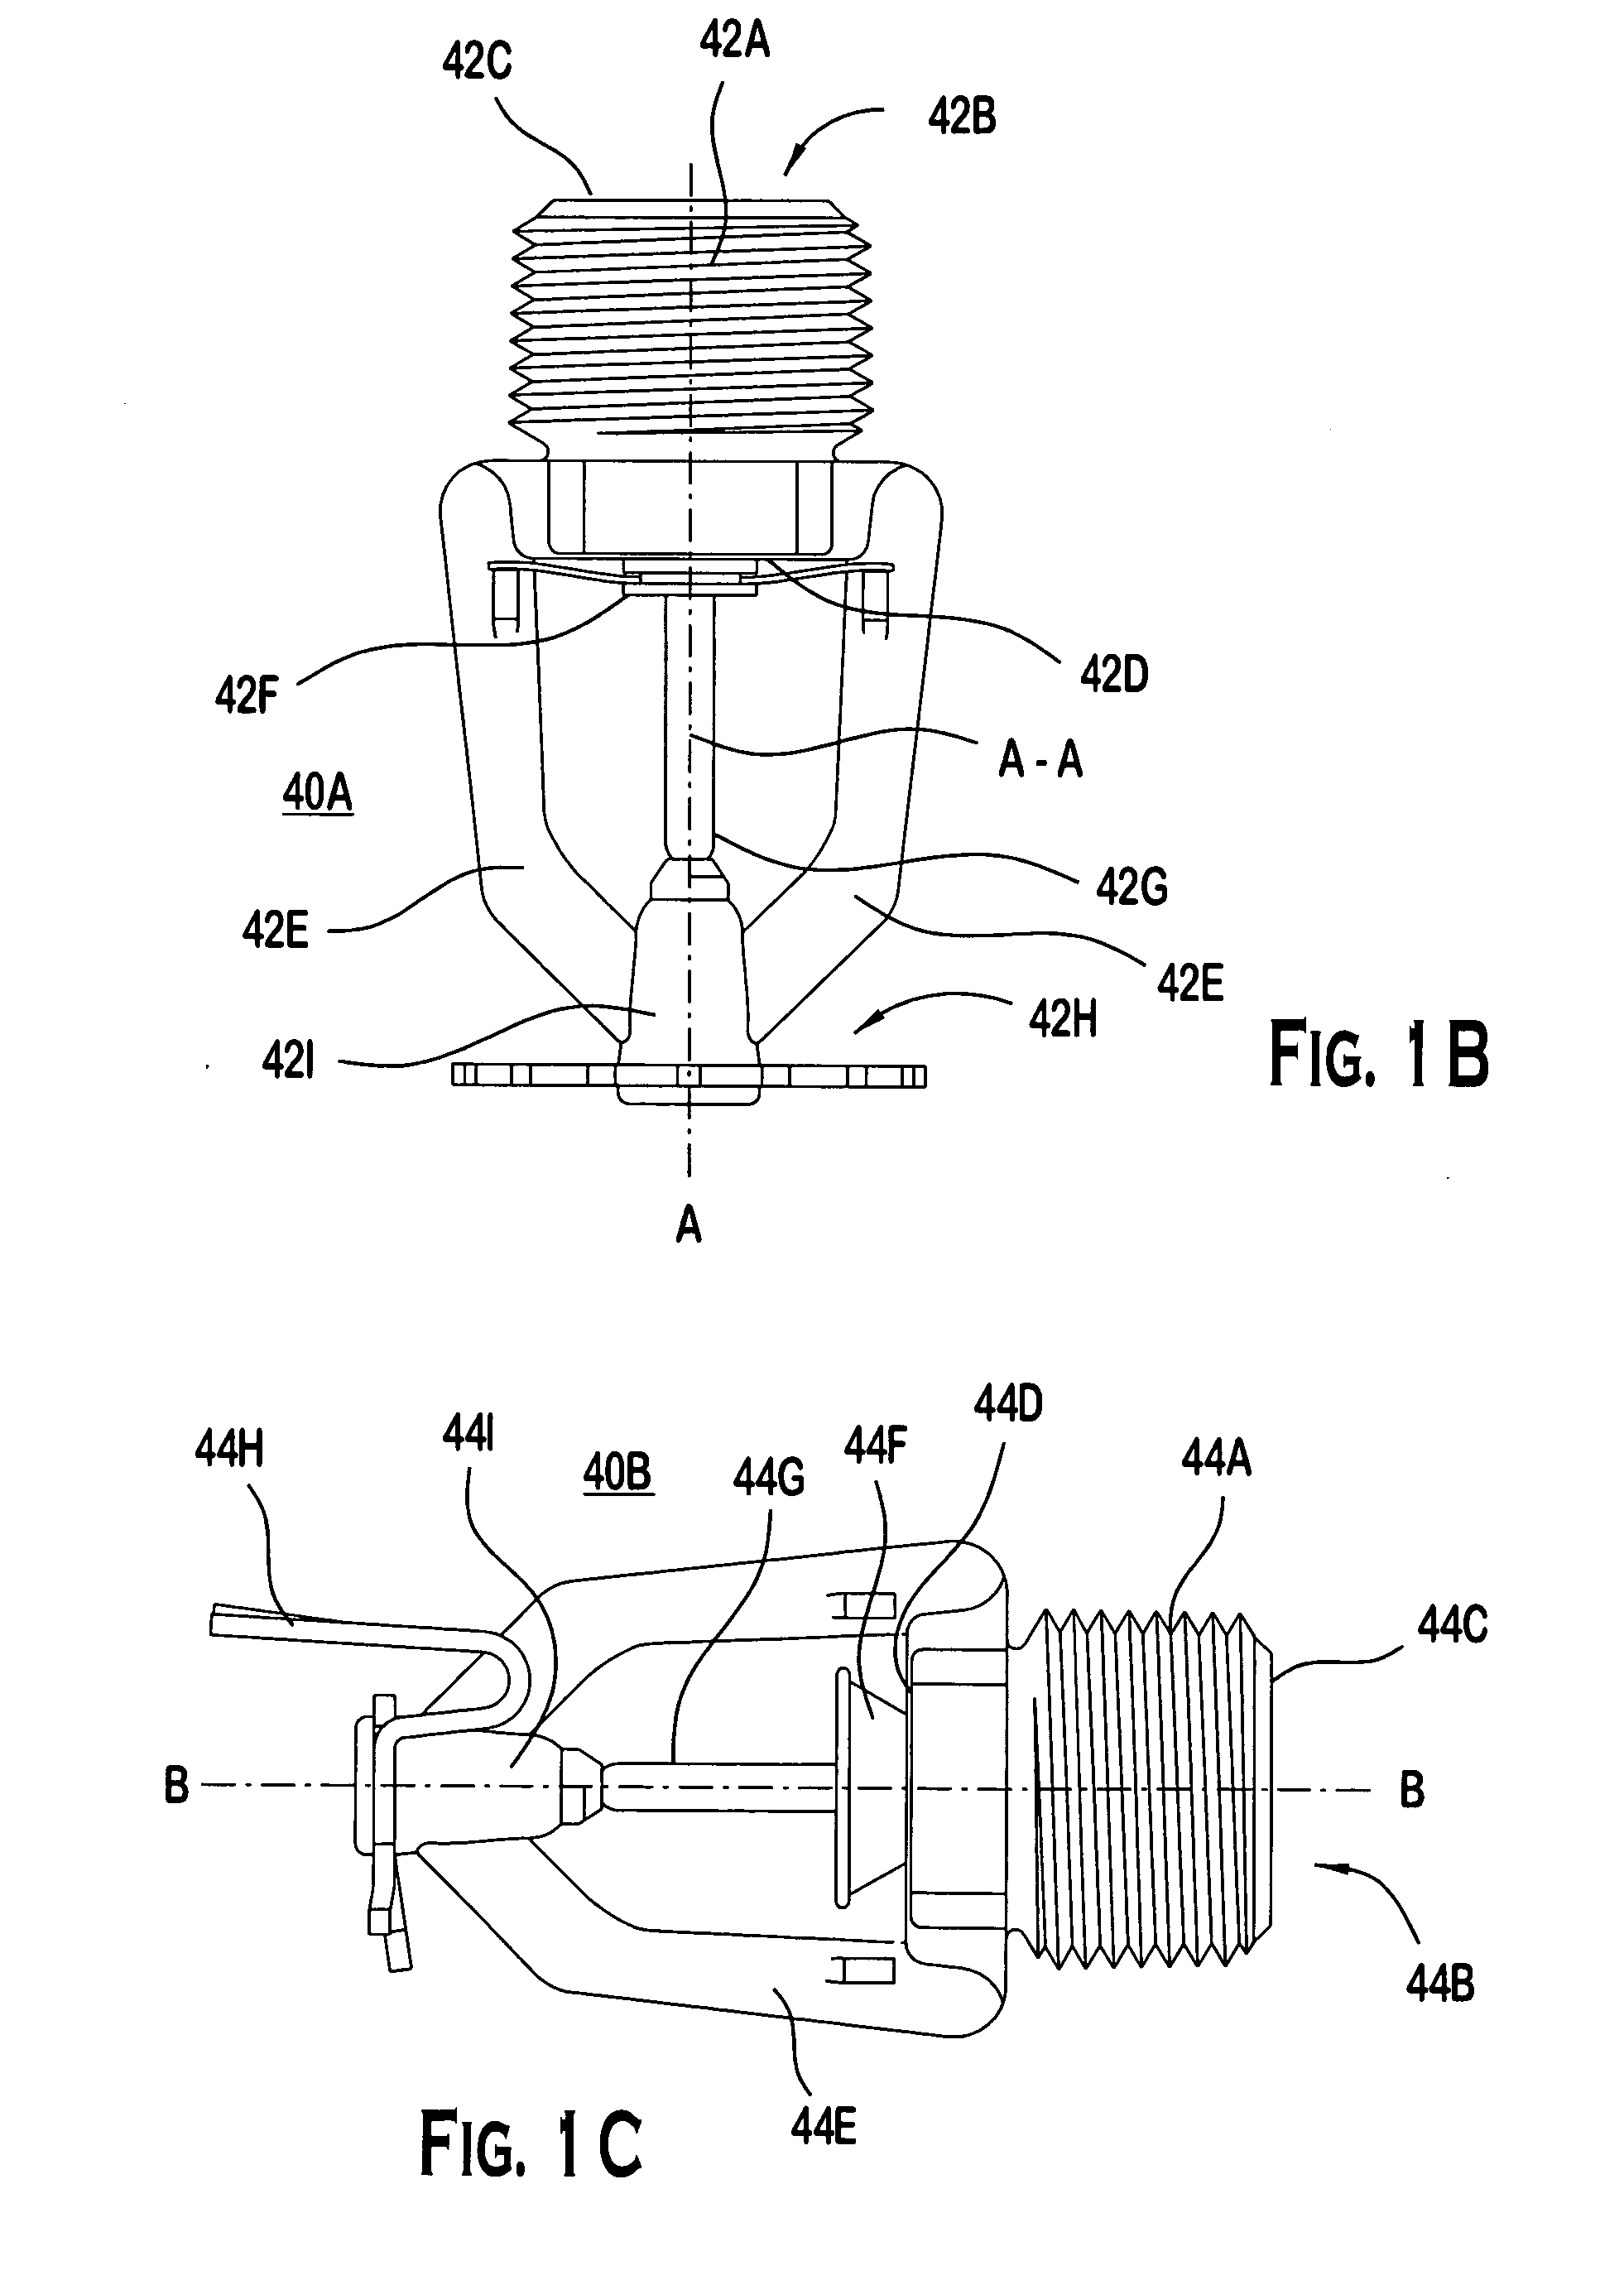 Non-interlock, non-preaction residential dry sprinkler fire protection system with a releasing control panel